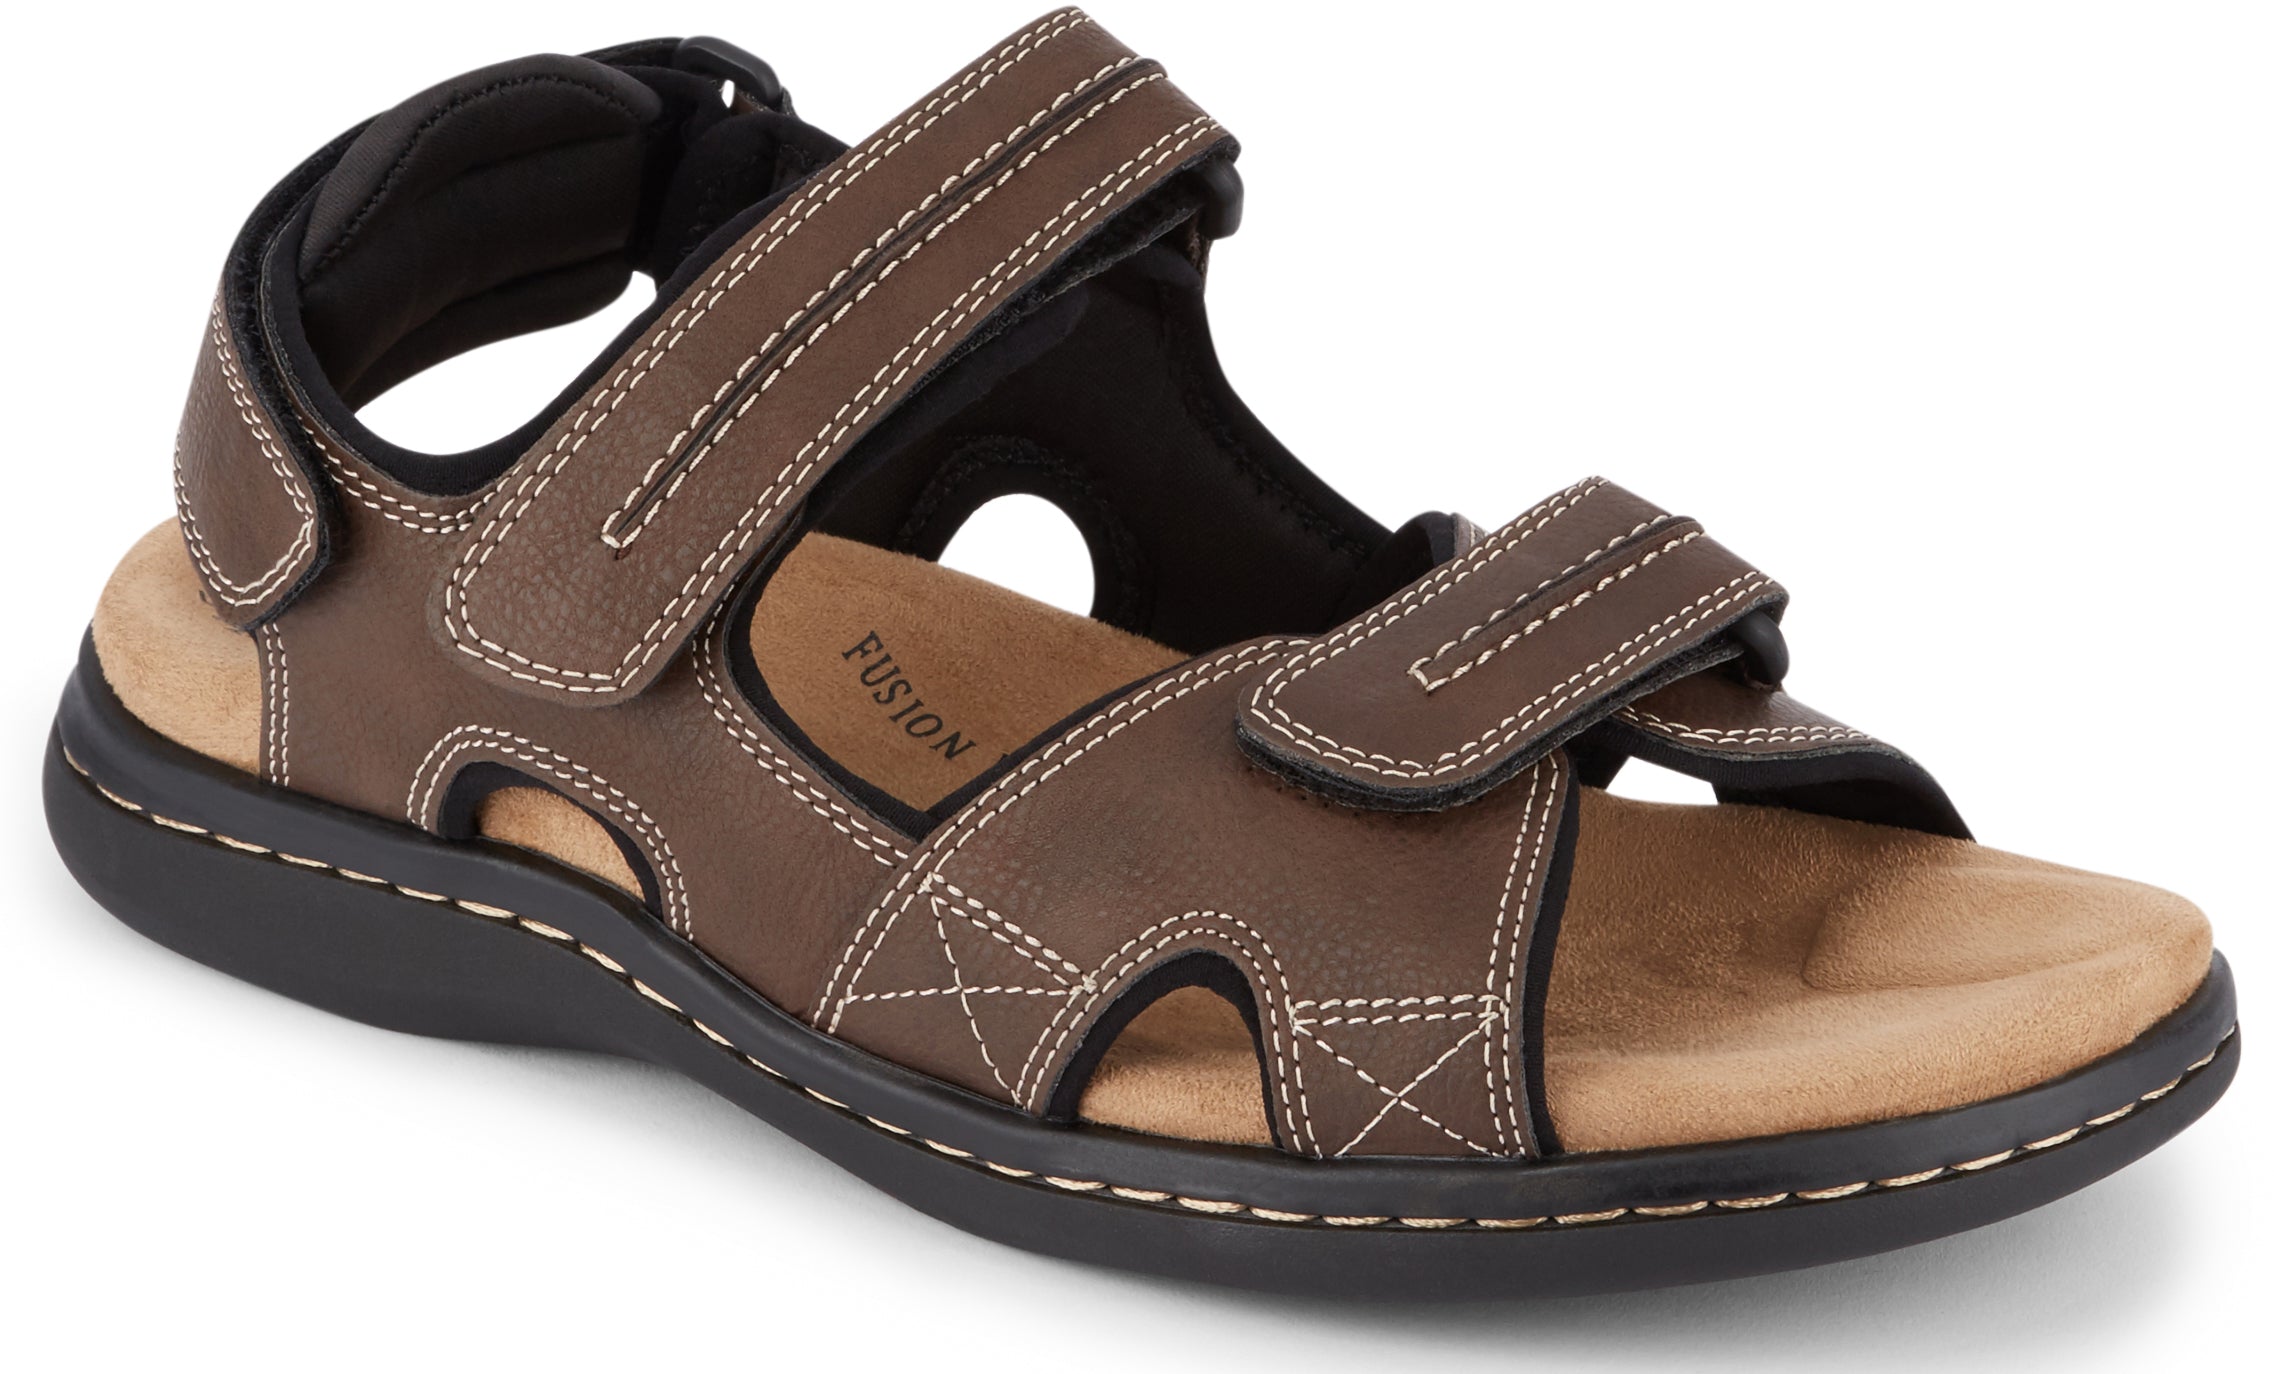 Dockers Men's Newpage Sandal in Briarcolor from the side view